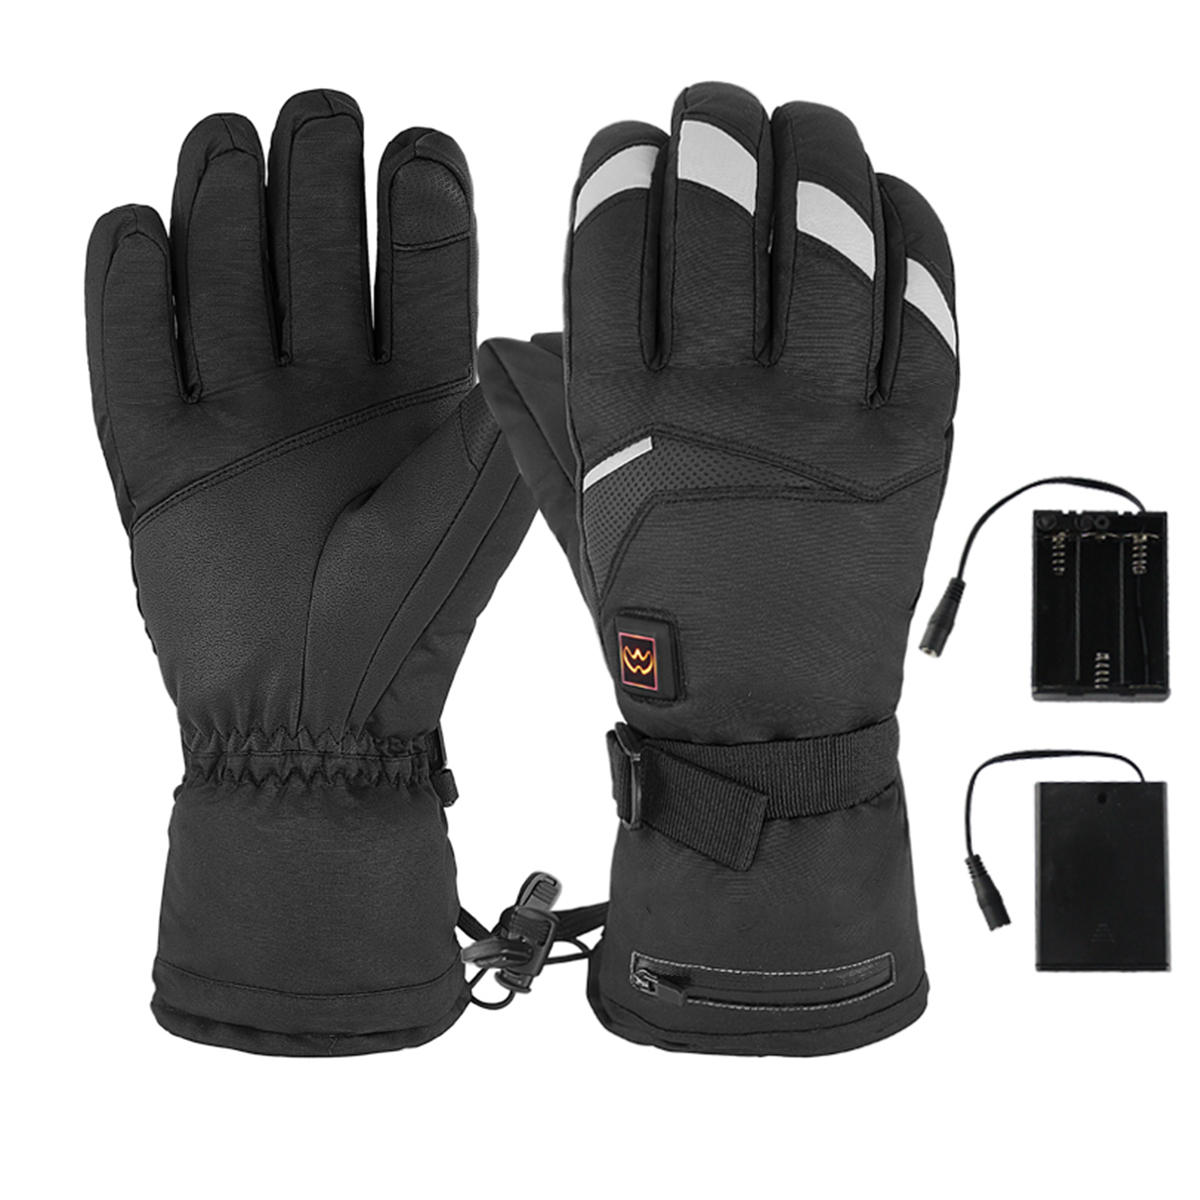 

M/L 5 Level Electric Heating Gloves Outdoor Skiing Waterproof Winter Heated Hand Warmer Non-slip